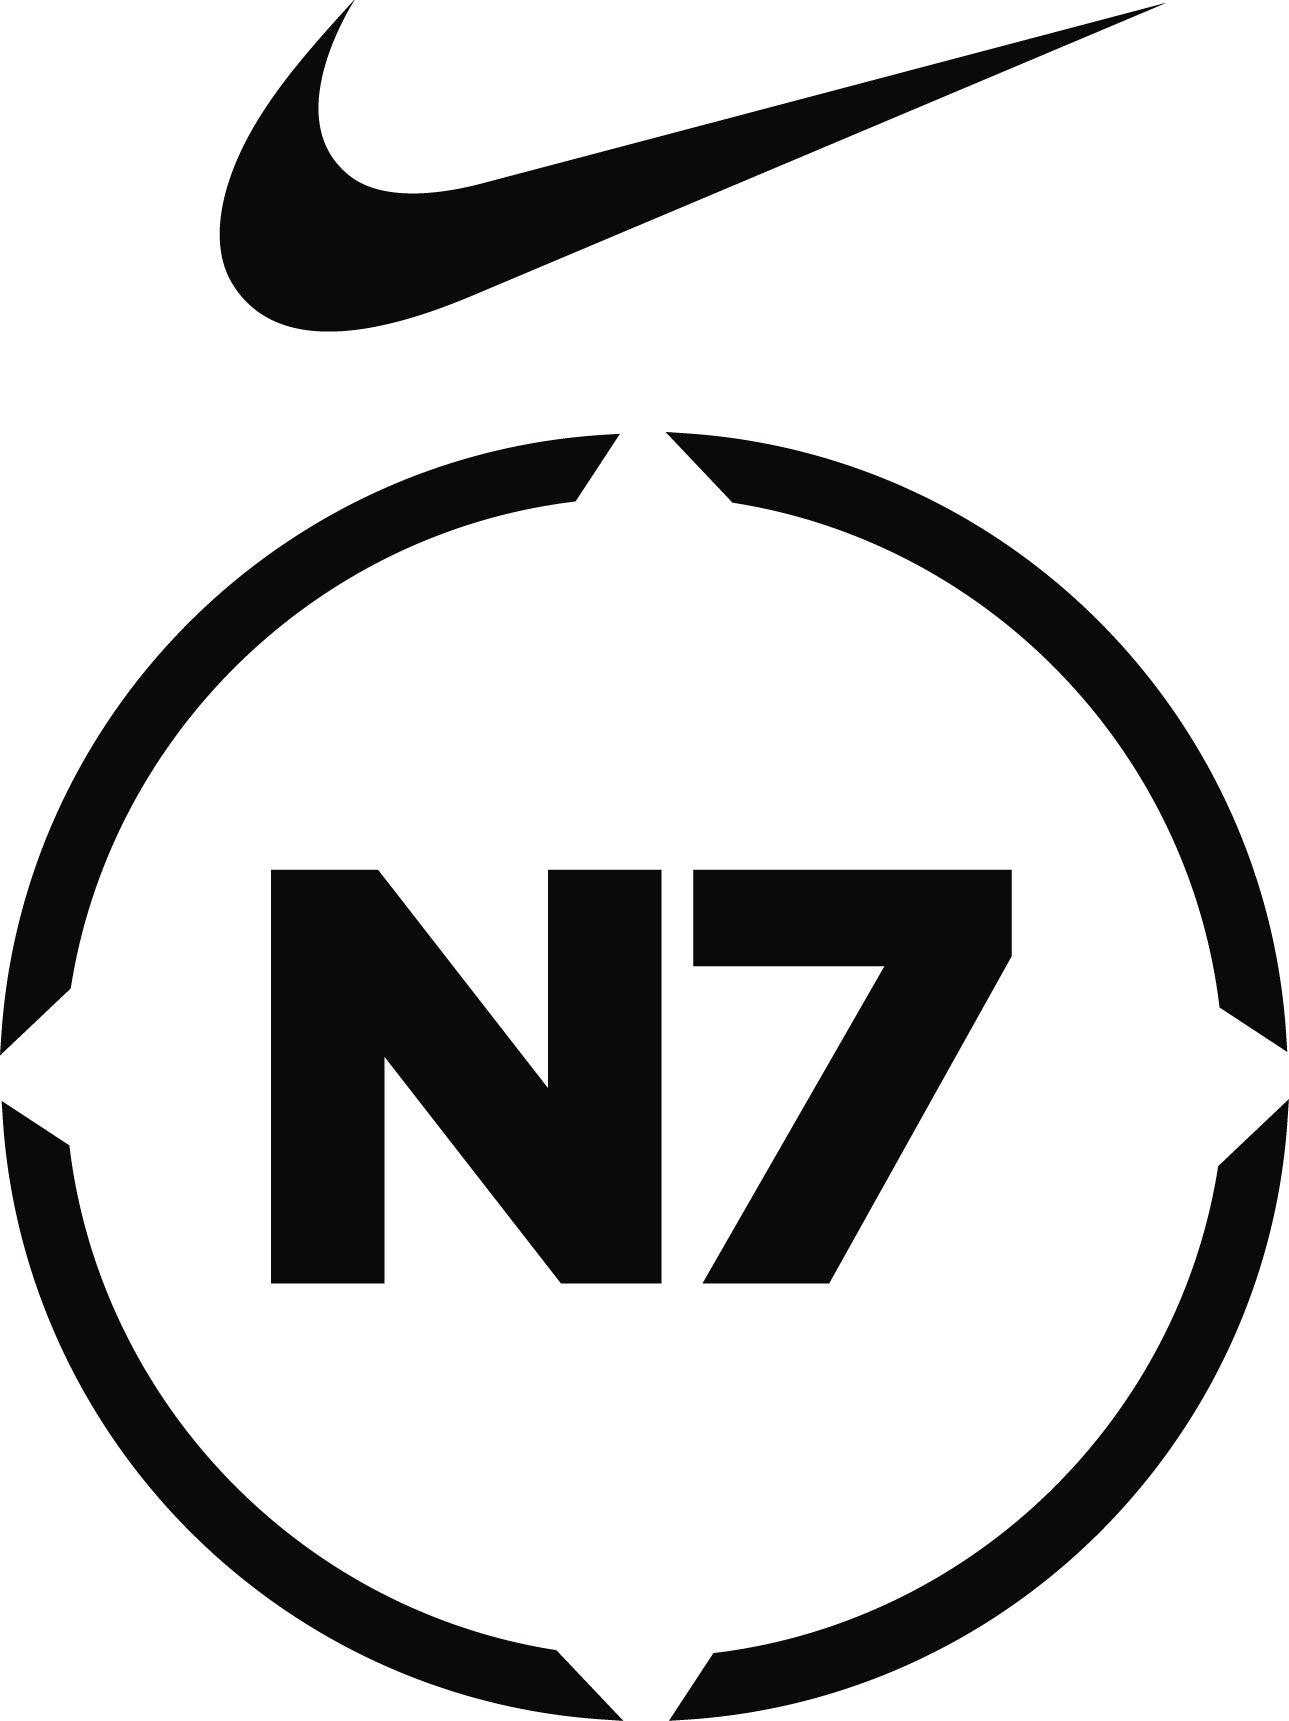 N7 logo consisting of a black Nike swoosh above a black circle. N7 is in the centre of the circle.